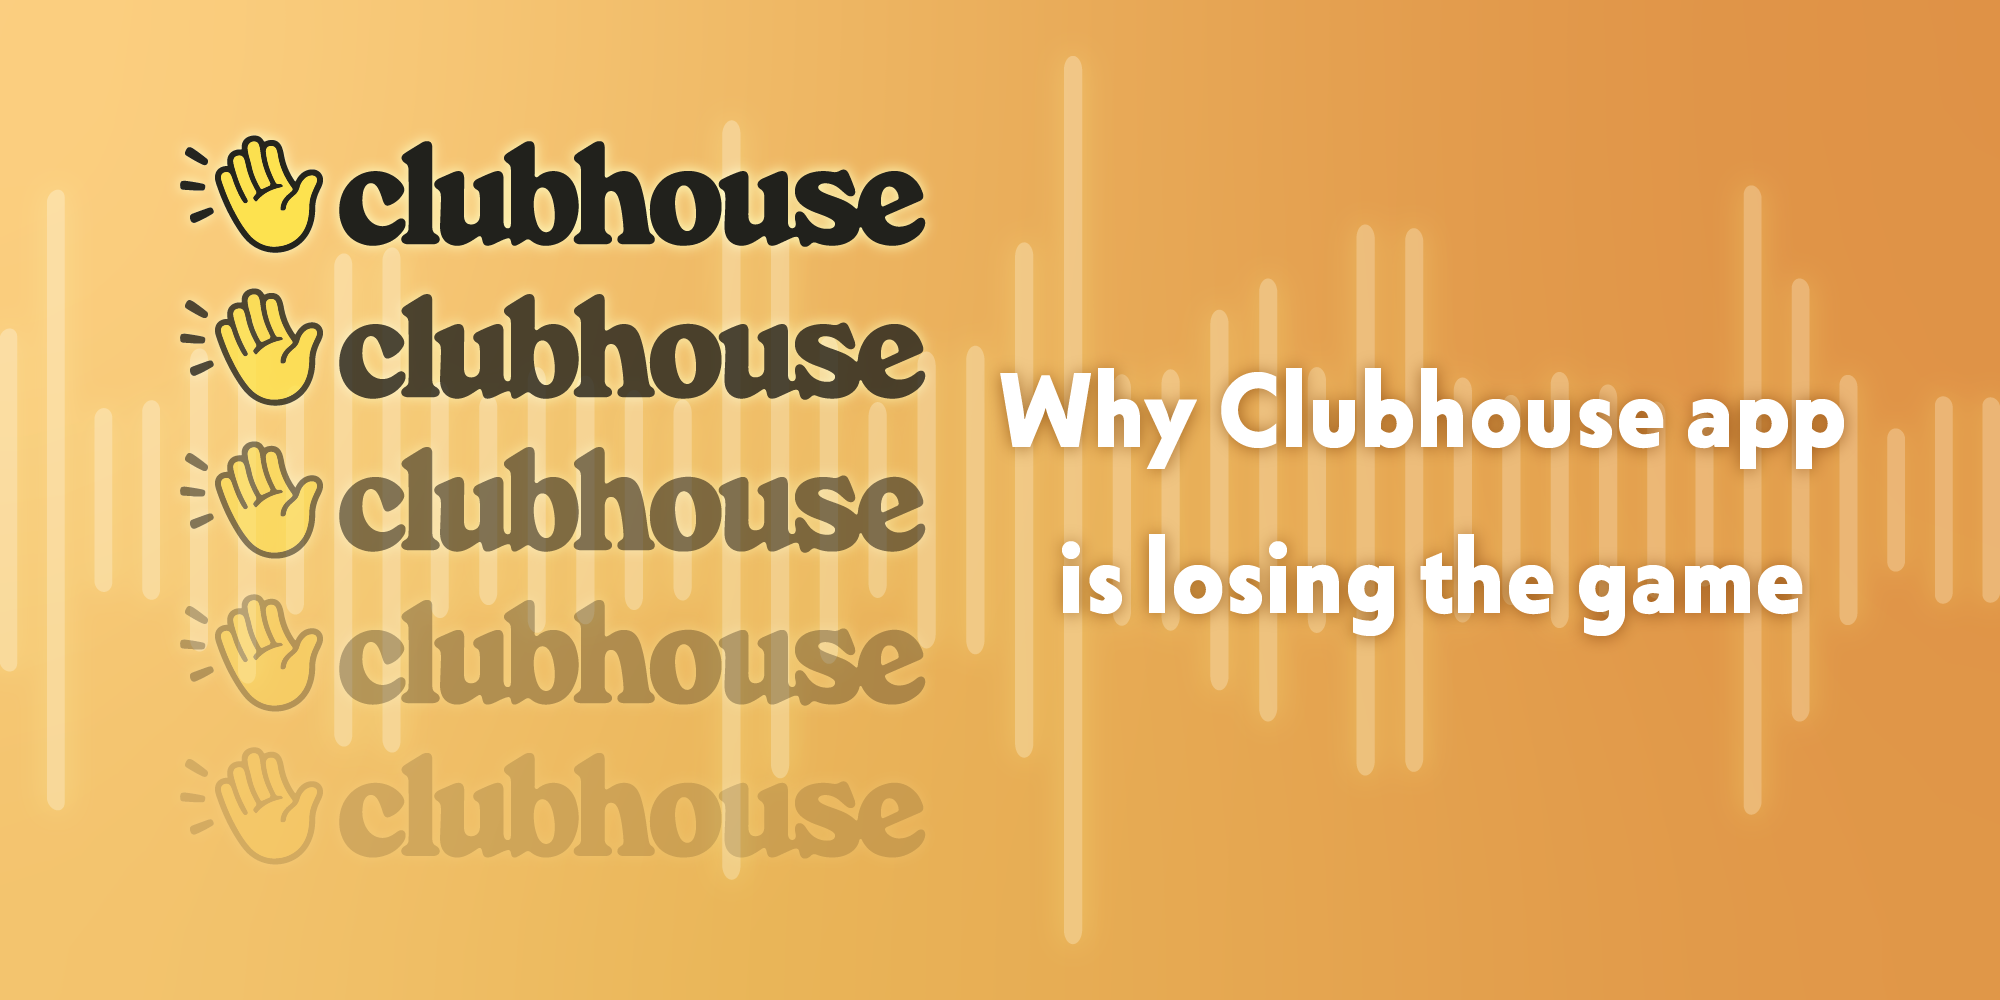 Hype, rooms and invitations: why Clubhouse app is losing the game